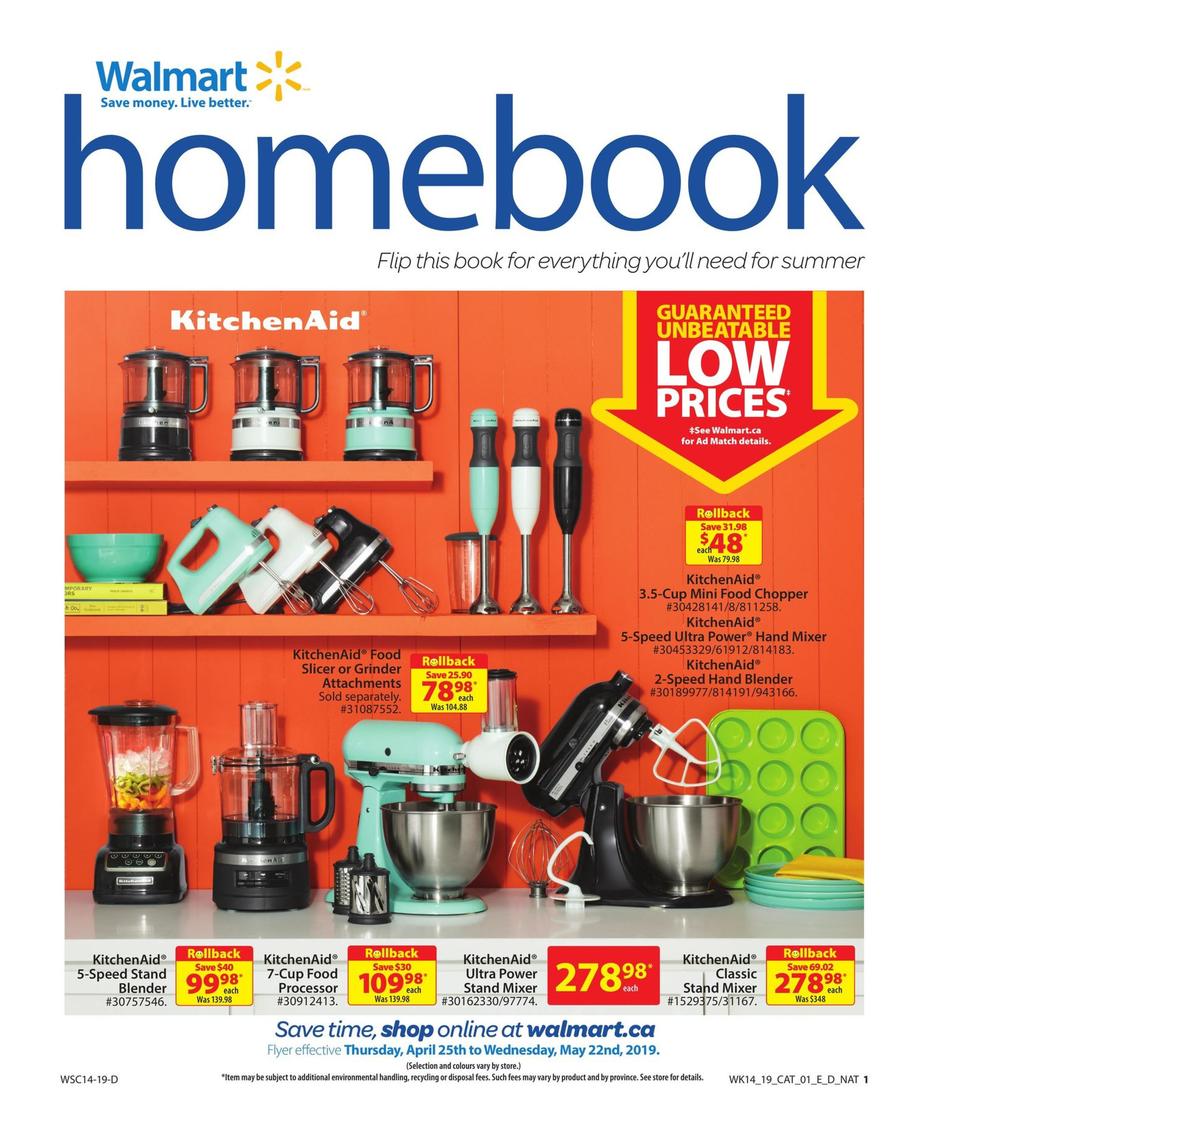 Walmart Home Book Flyer from April 25